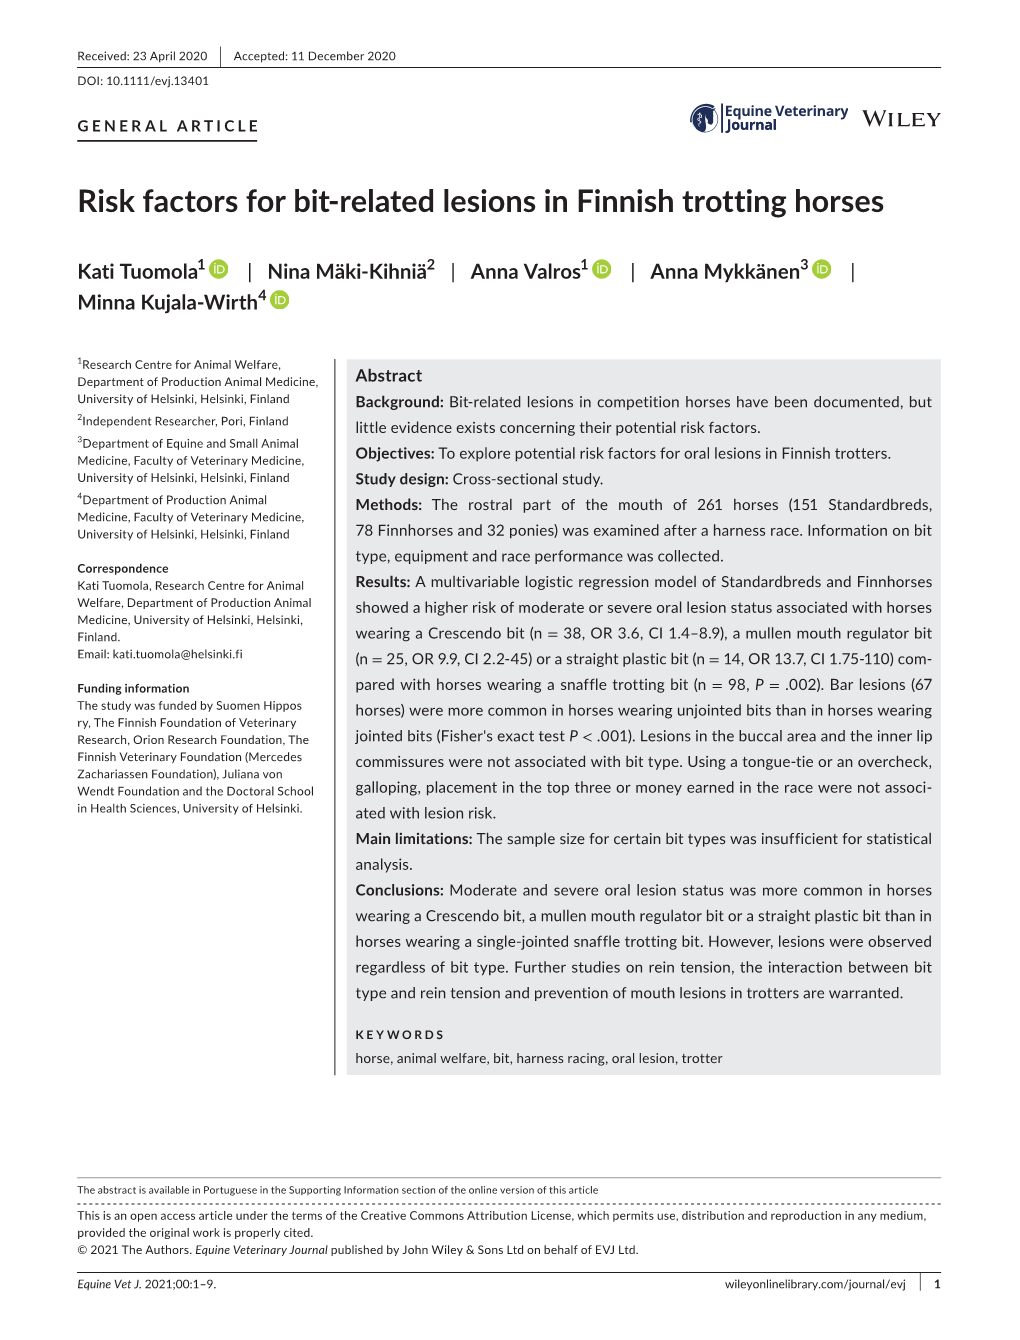 Risk Factors for Bit‐Related Lesions in Finnish Trotting Horses